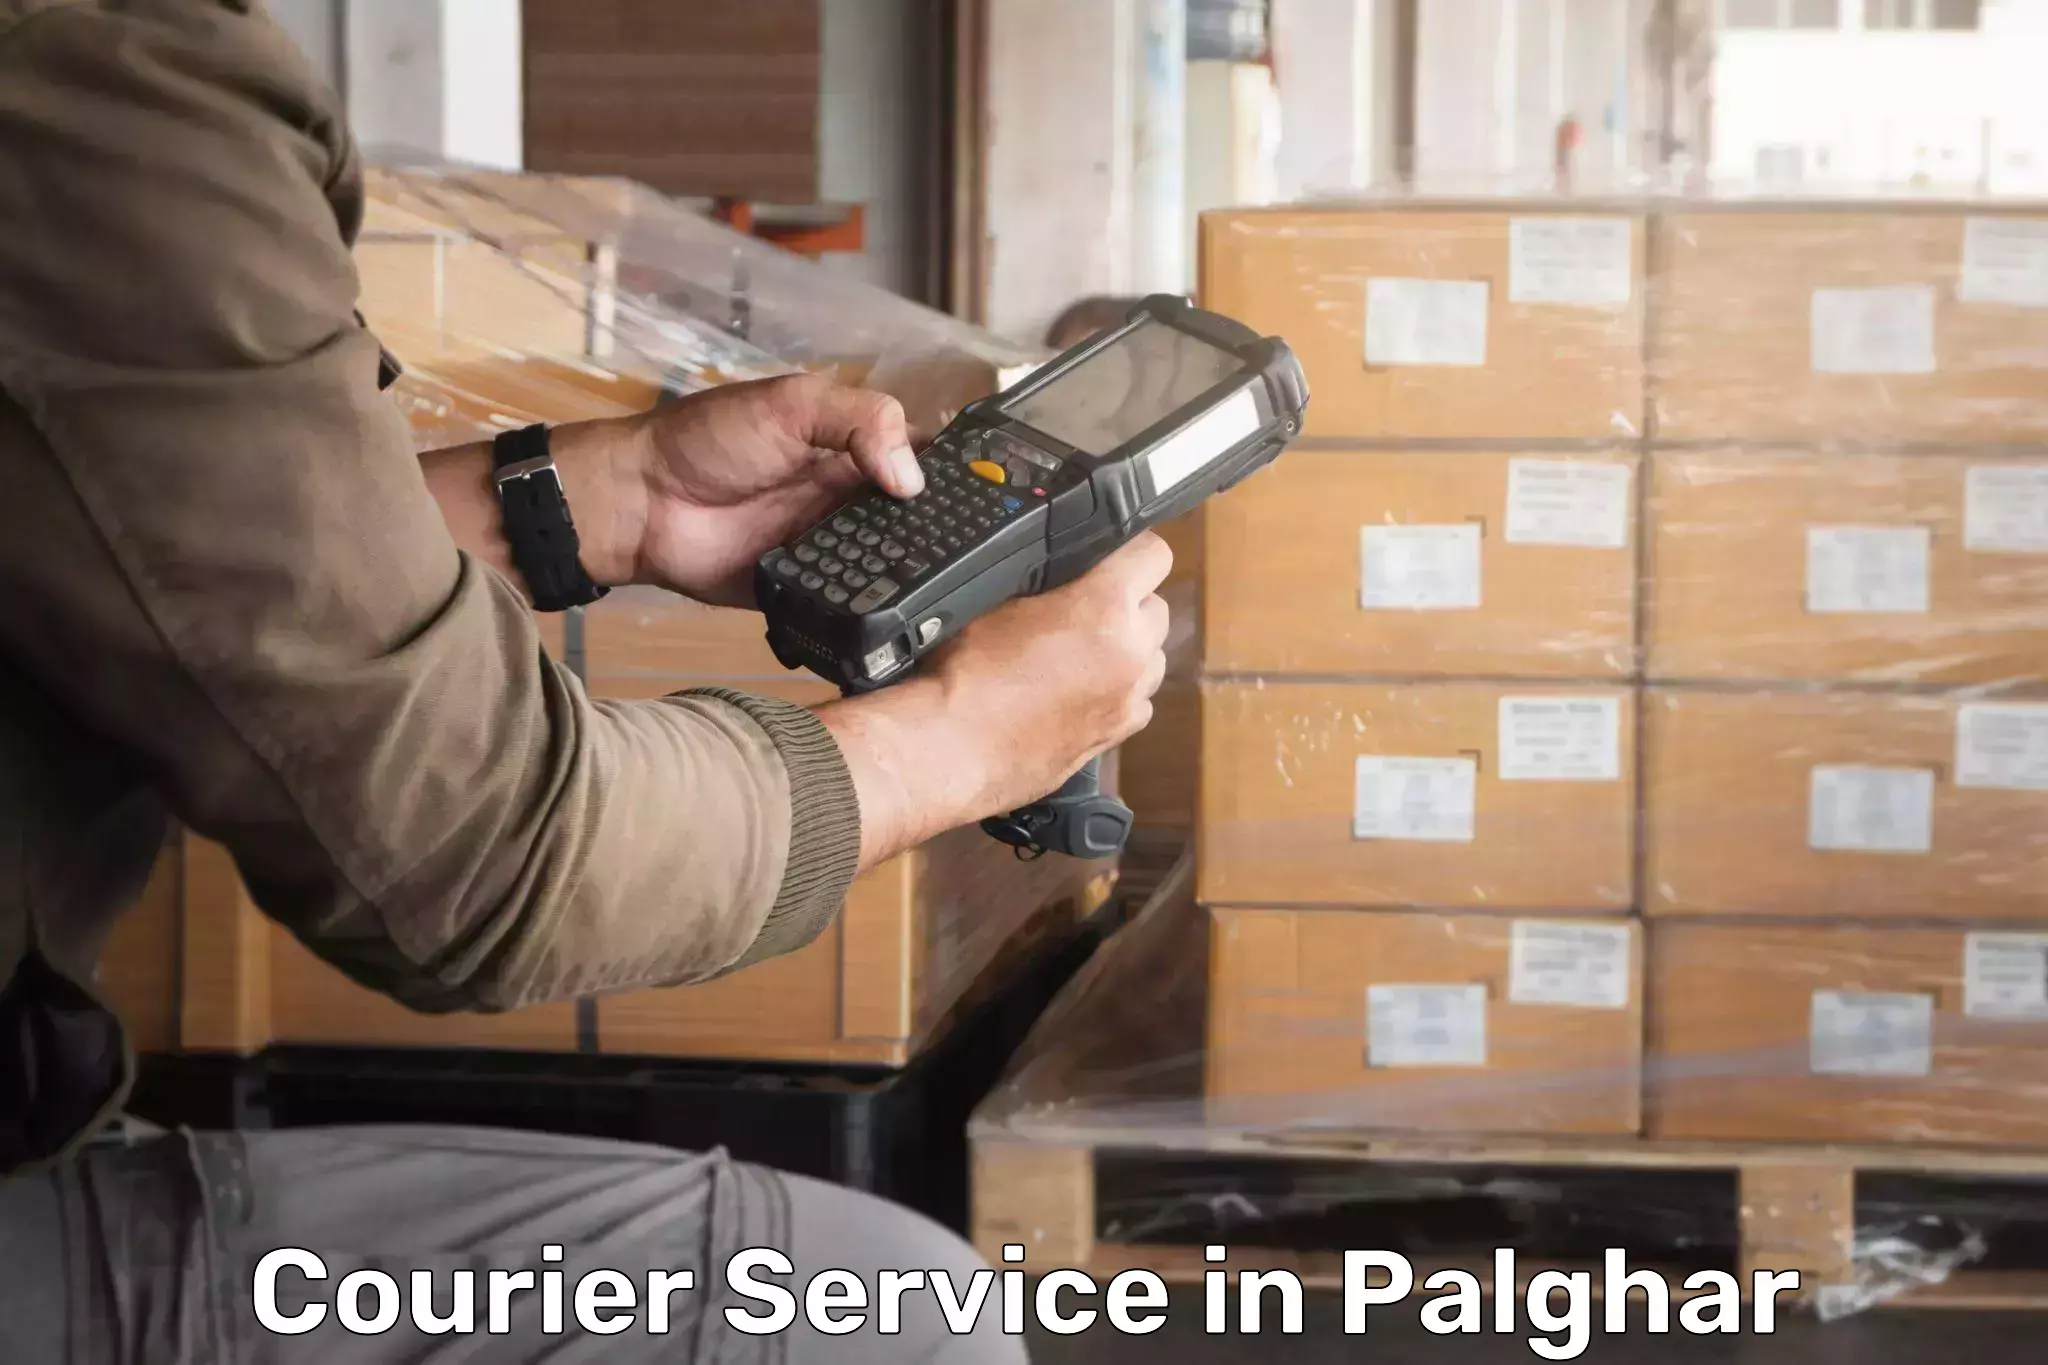 Delivery service partnership in Palghar